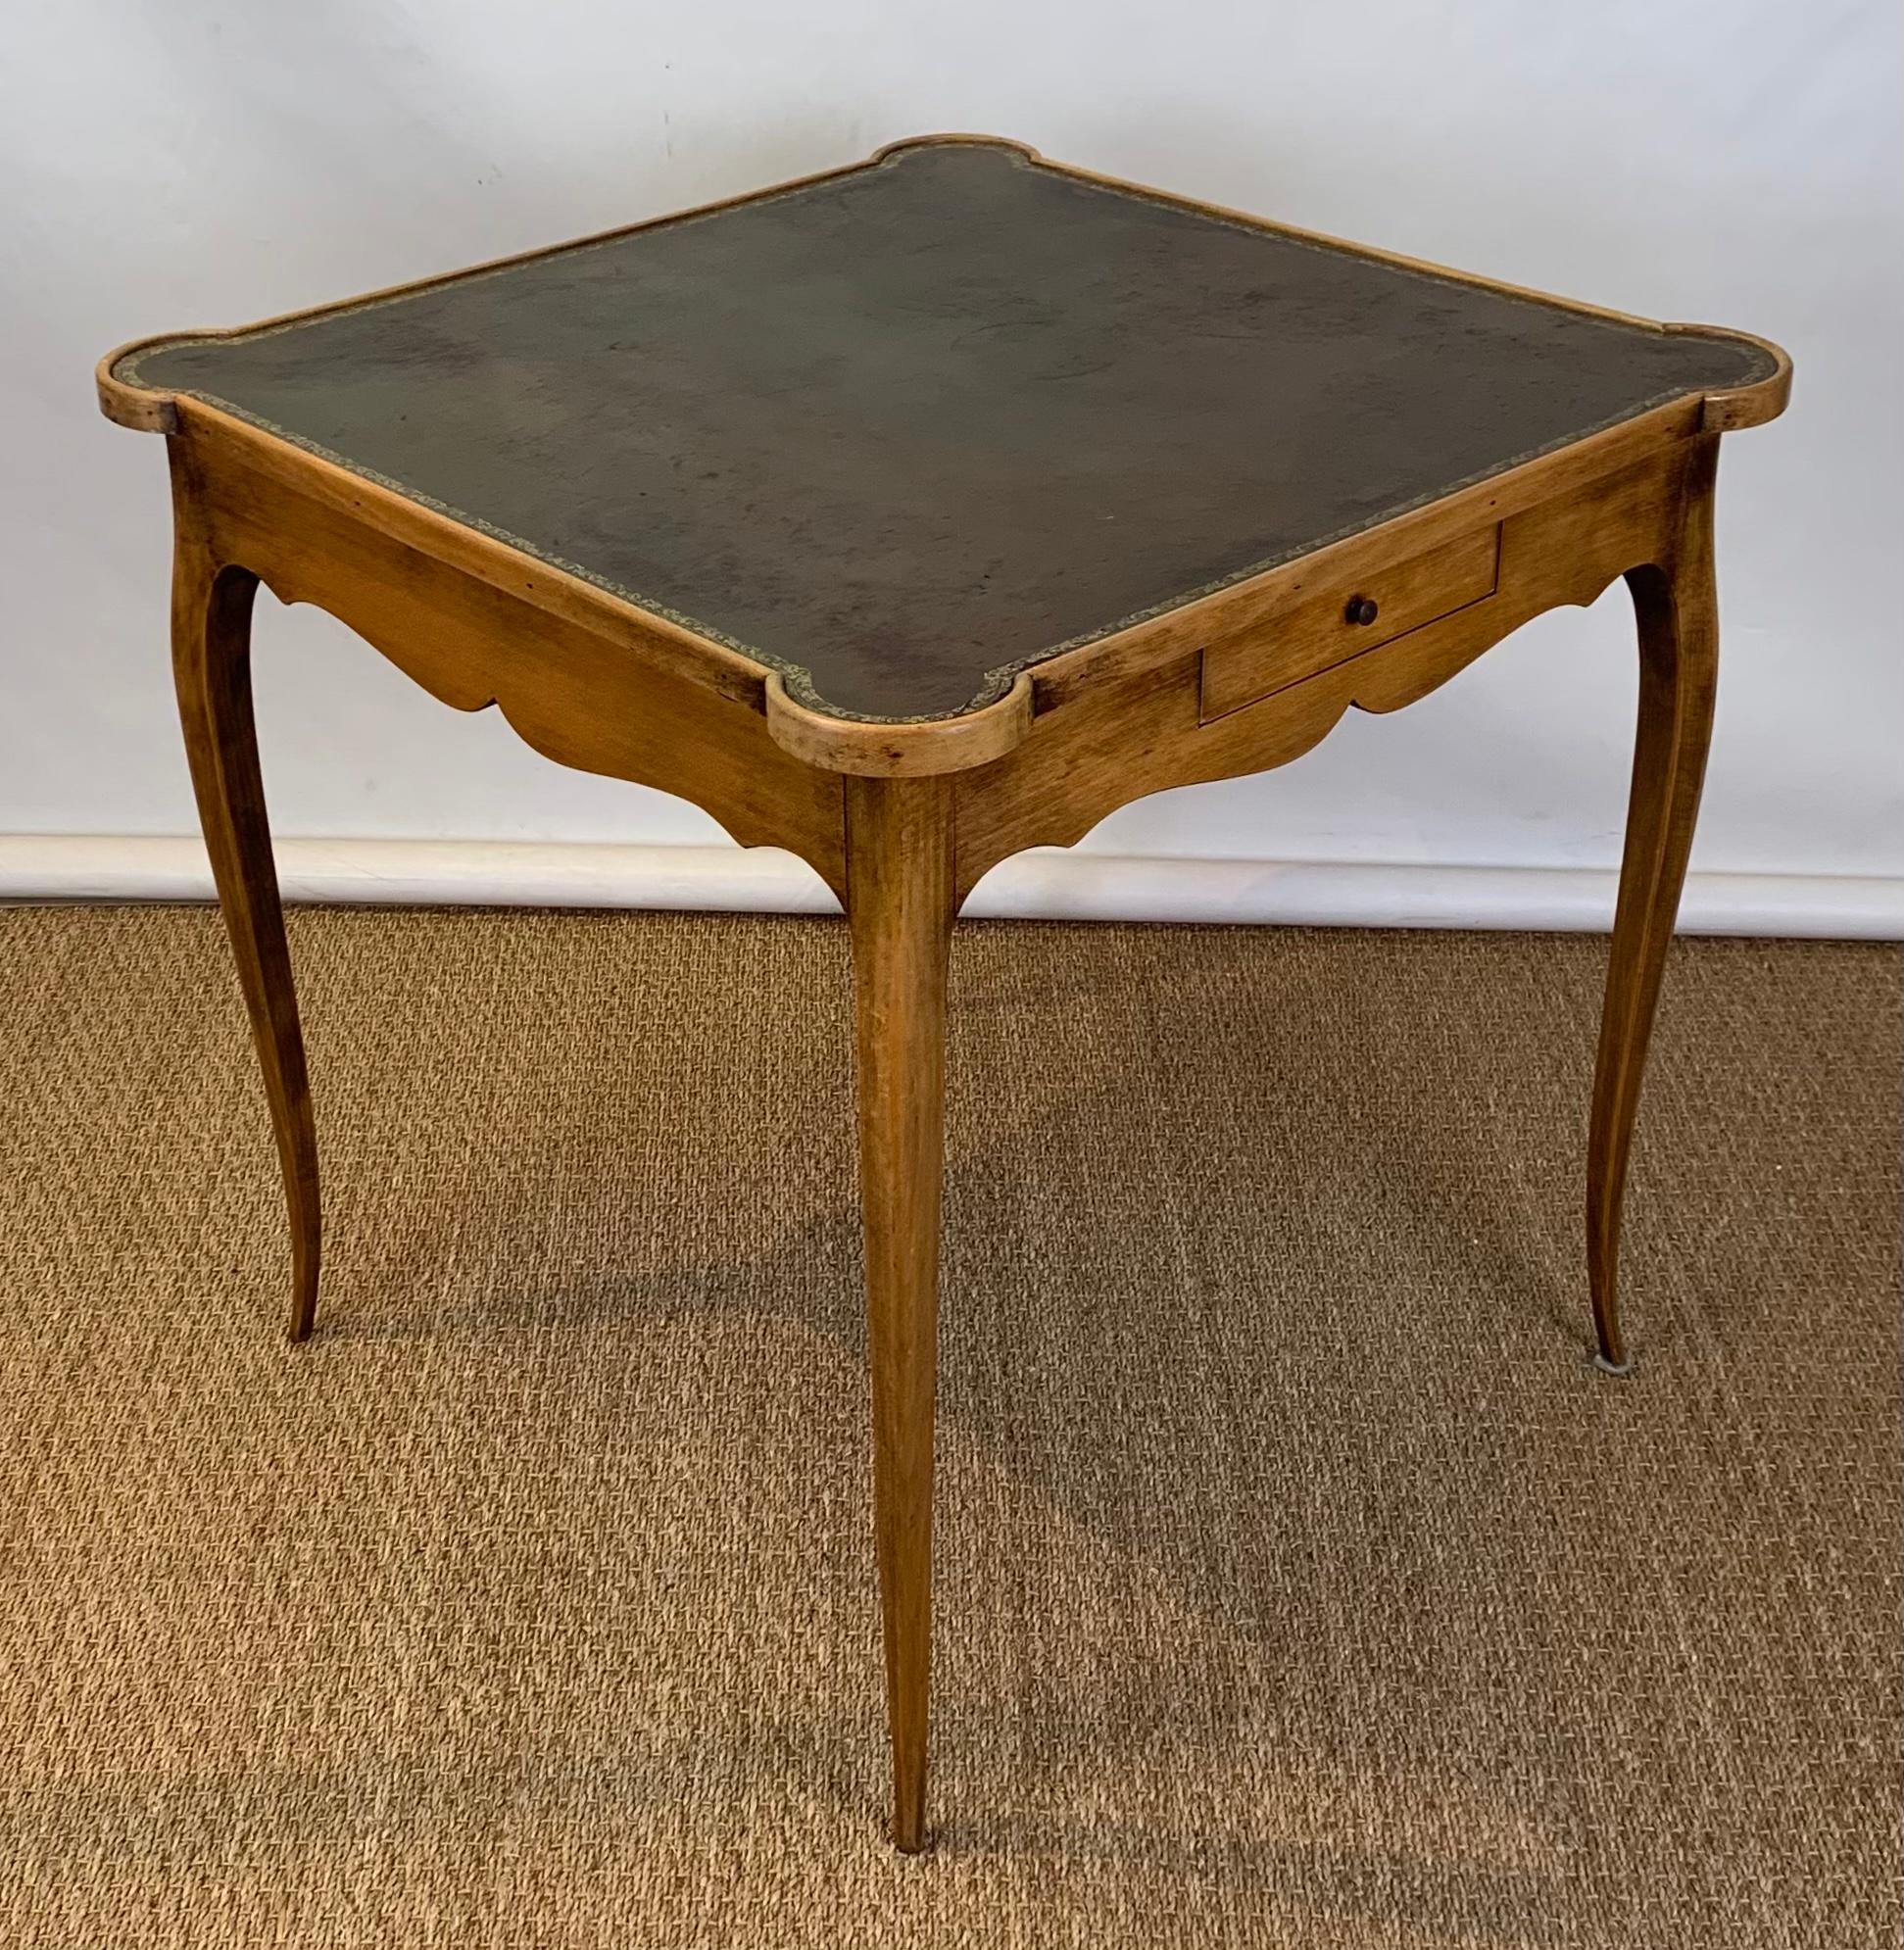 Mid-20th Century Diminutive Leather Topped Games Table